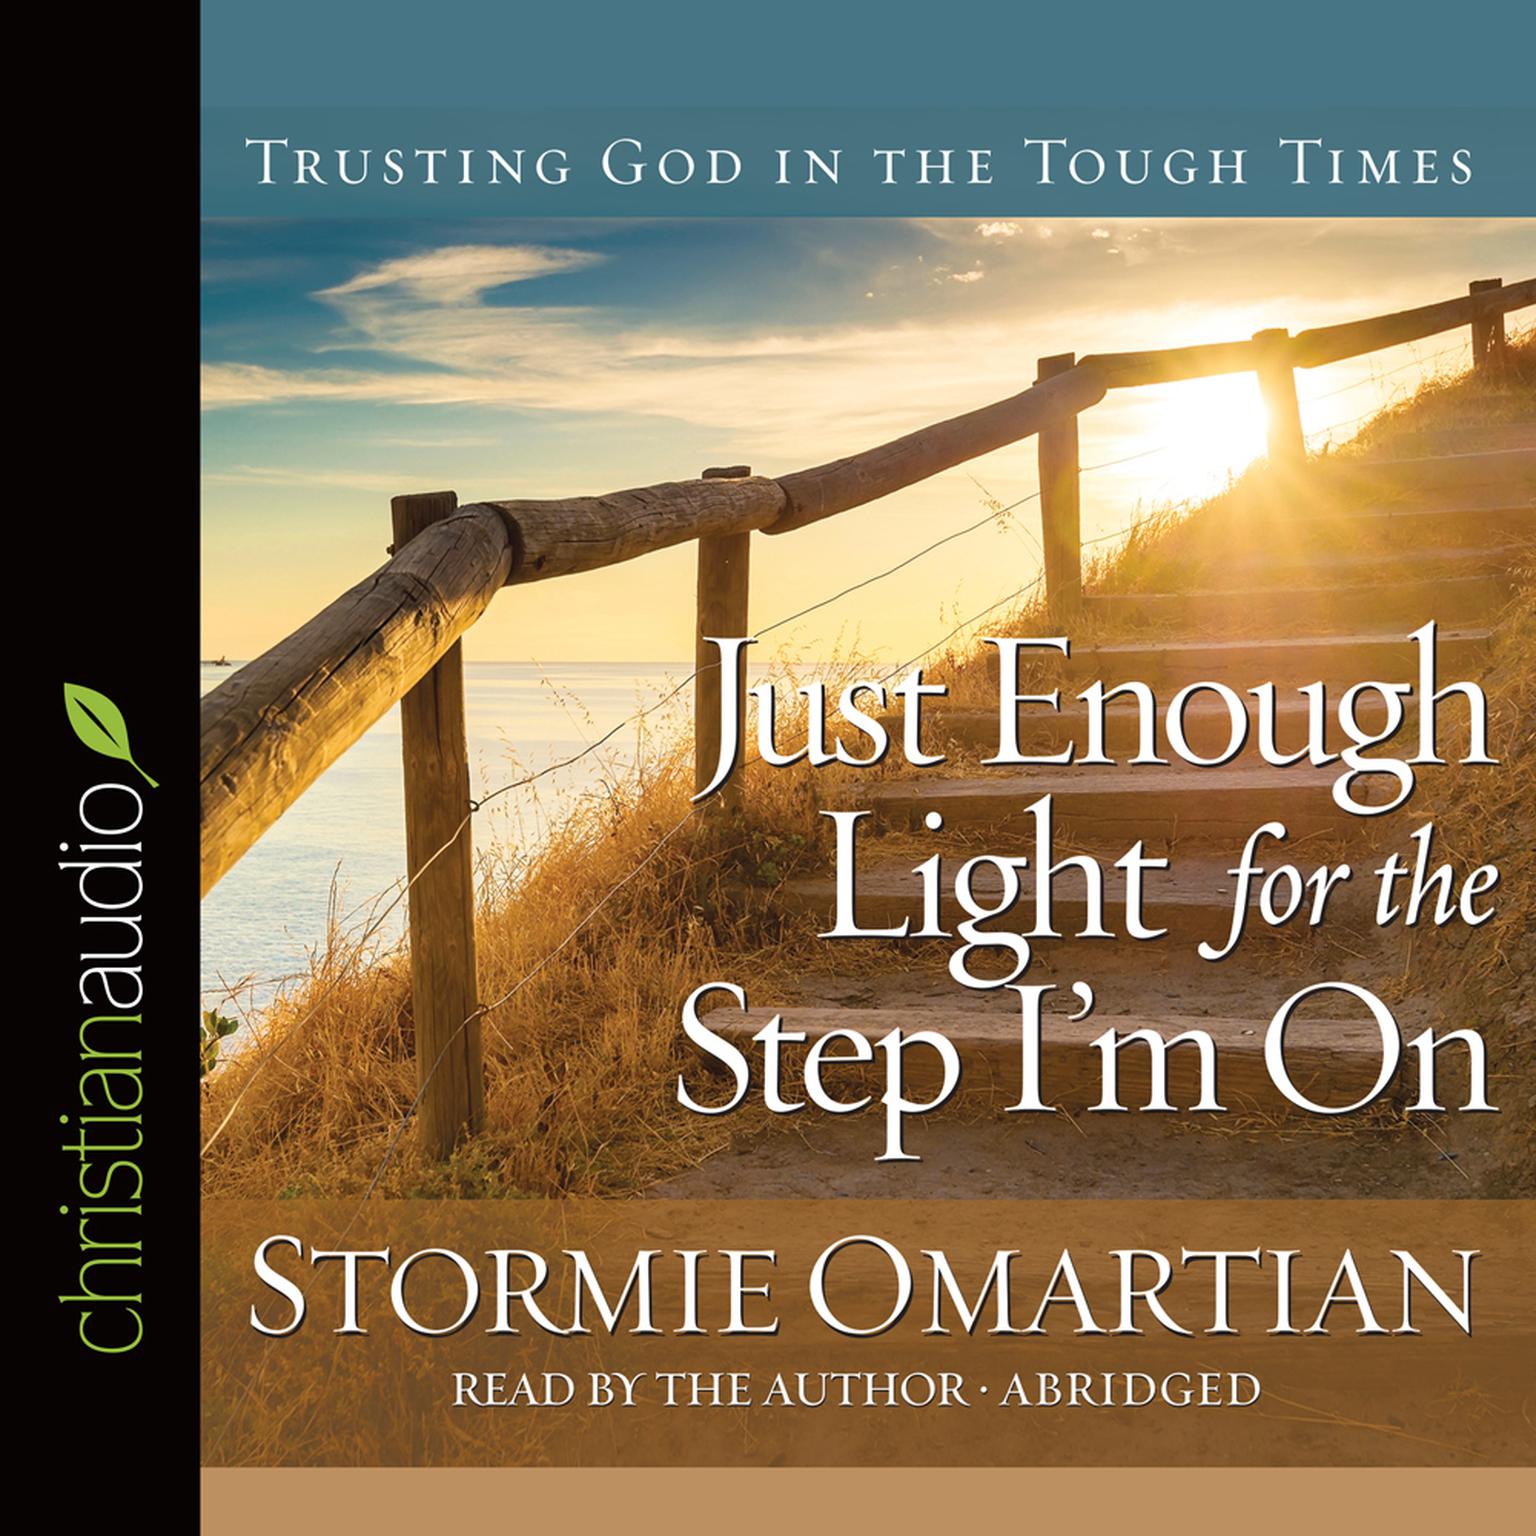 Just Enough Light for the Step Im On (Abridged): Trusting God in the Tough Times Audiobook, by Stormie Omartian